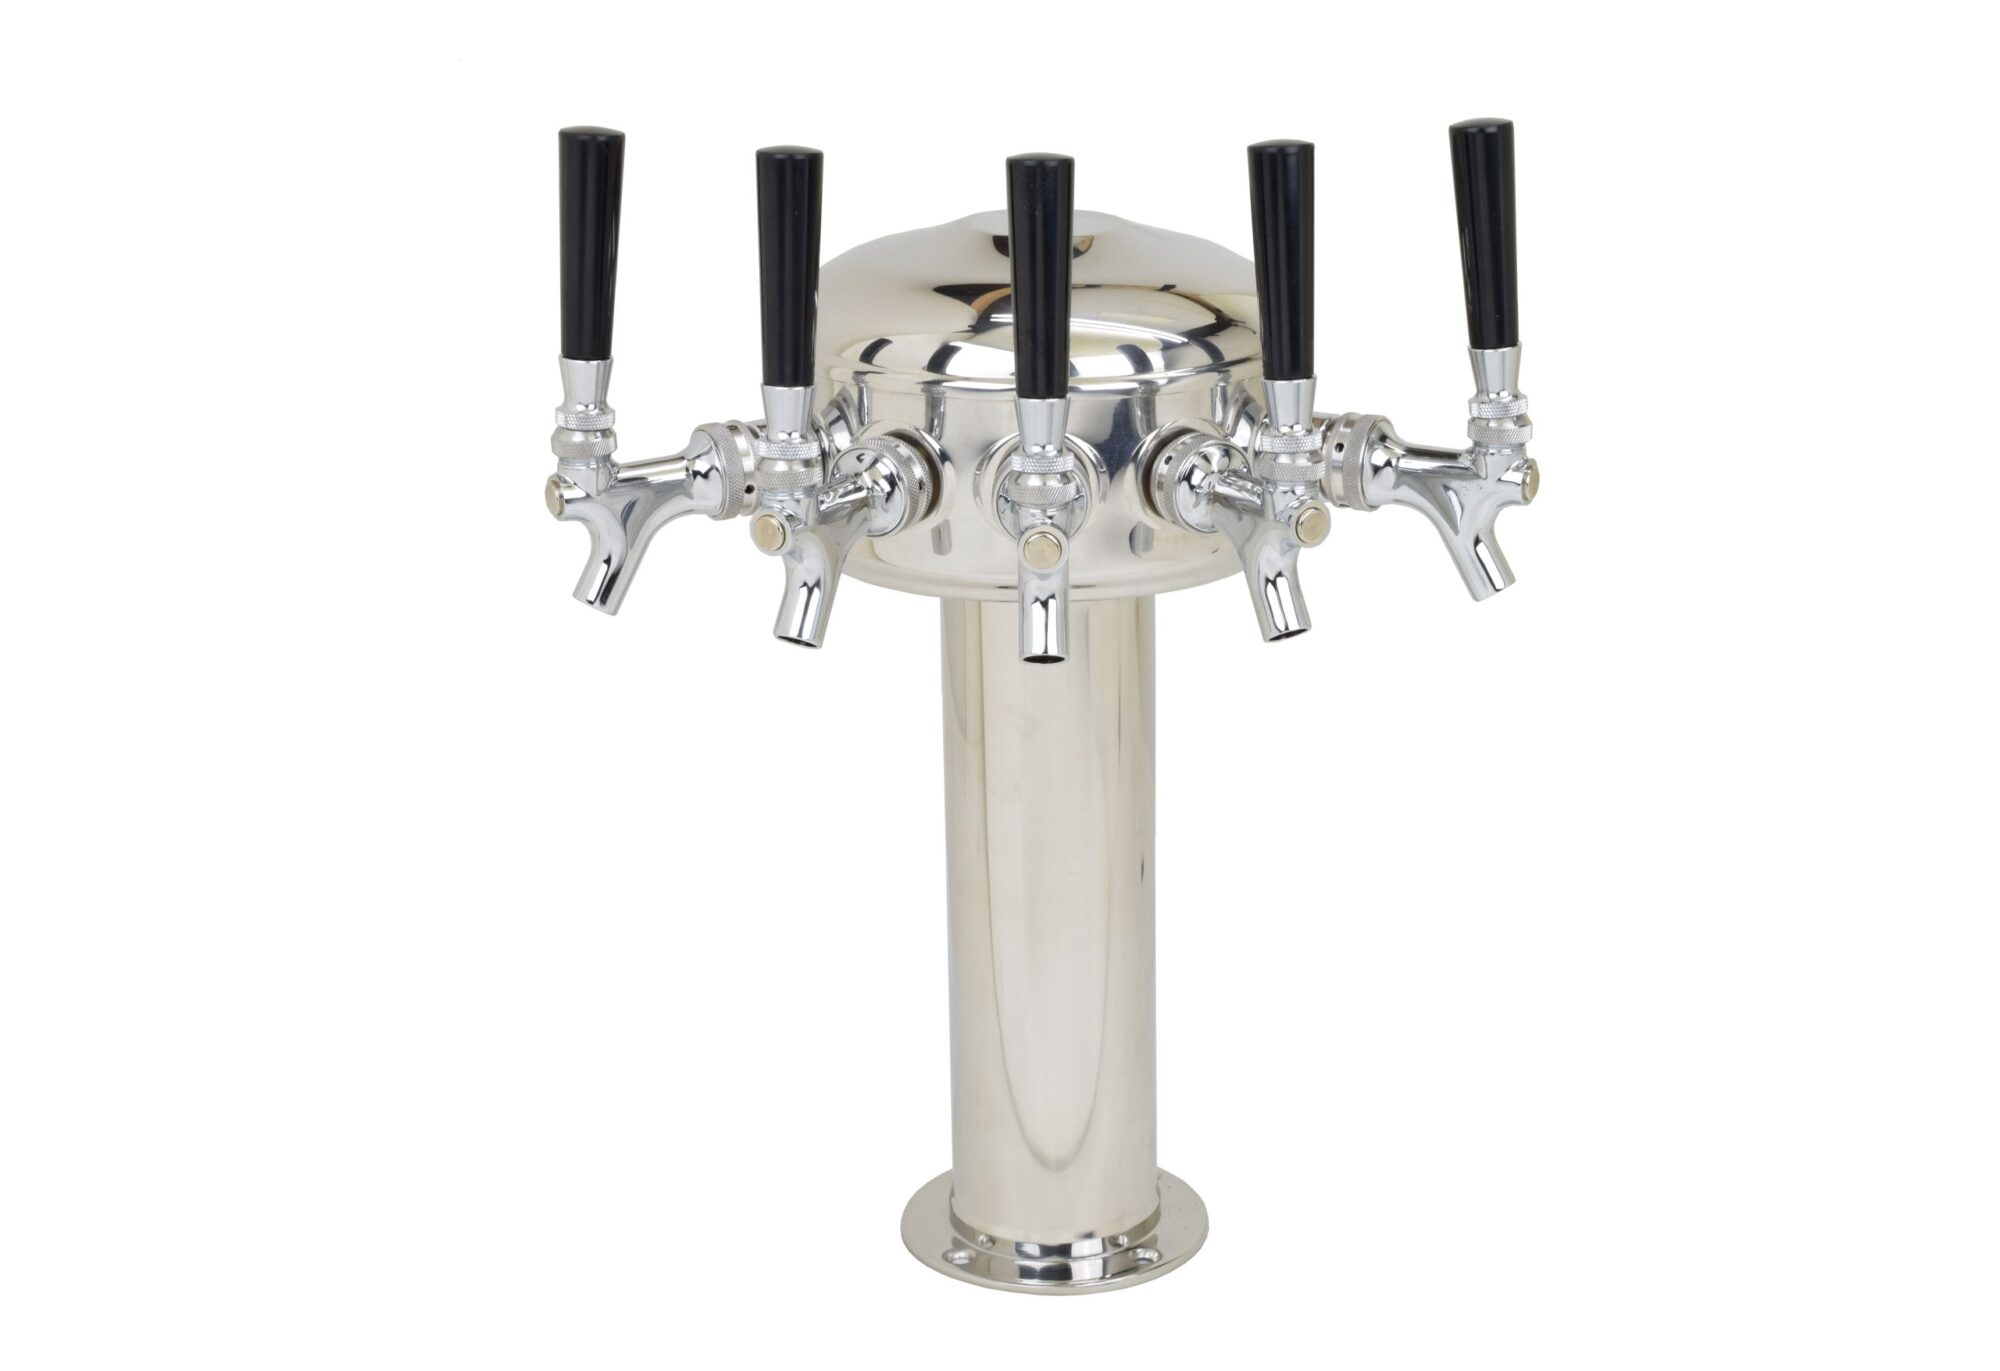 626CG-5SSfront Five Faucet Mini Mushroom Tower with 304 SS Faucets and Shanks - Glycol Ready